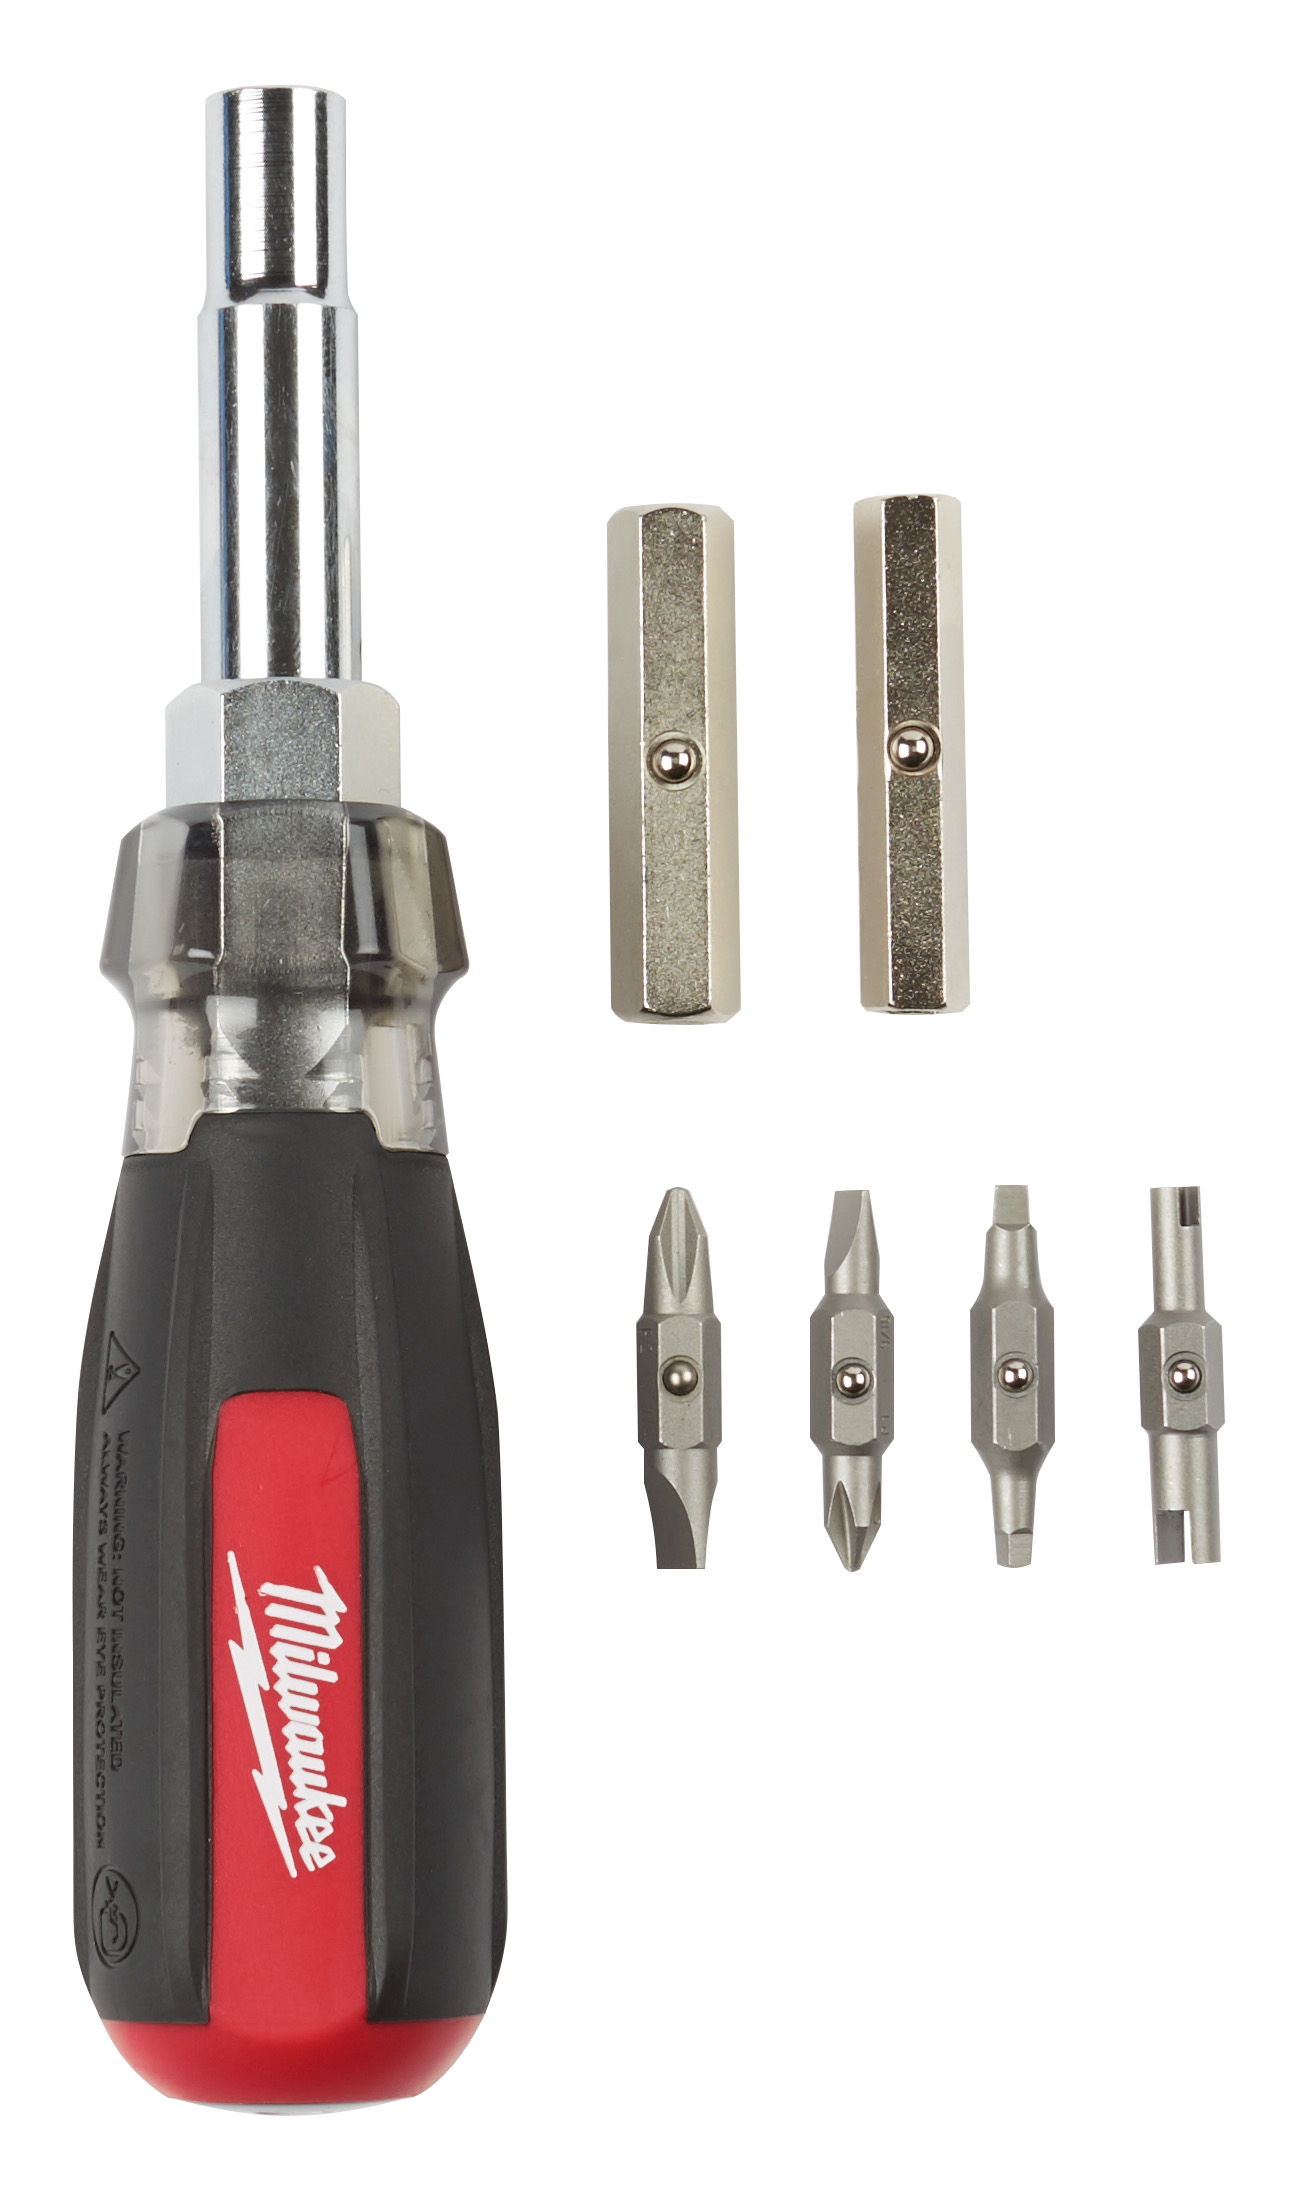 The Milwaukee 13-in-1 cushion grip screwdriver with Schrader bit features 13 unique functions, ultimately reducing the number of tools a user must carry. The 13-in-1 screwdriver includes the 8 bits and 4 nut drivers most requested by HVAC professionals. The bit prevents bit wear from hardened screws and extends bit life when fastening specialty screws found in electrical boxes, conduit couplers, outlets and other common job site fixtures. The tri-material cushion grip handle offers best-in-class durability and will not peel. Covered by Milwaukee's Limited Lifetime Warranty.